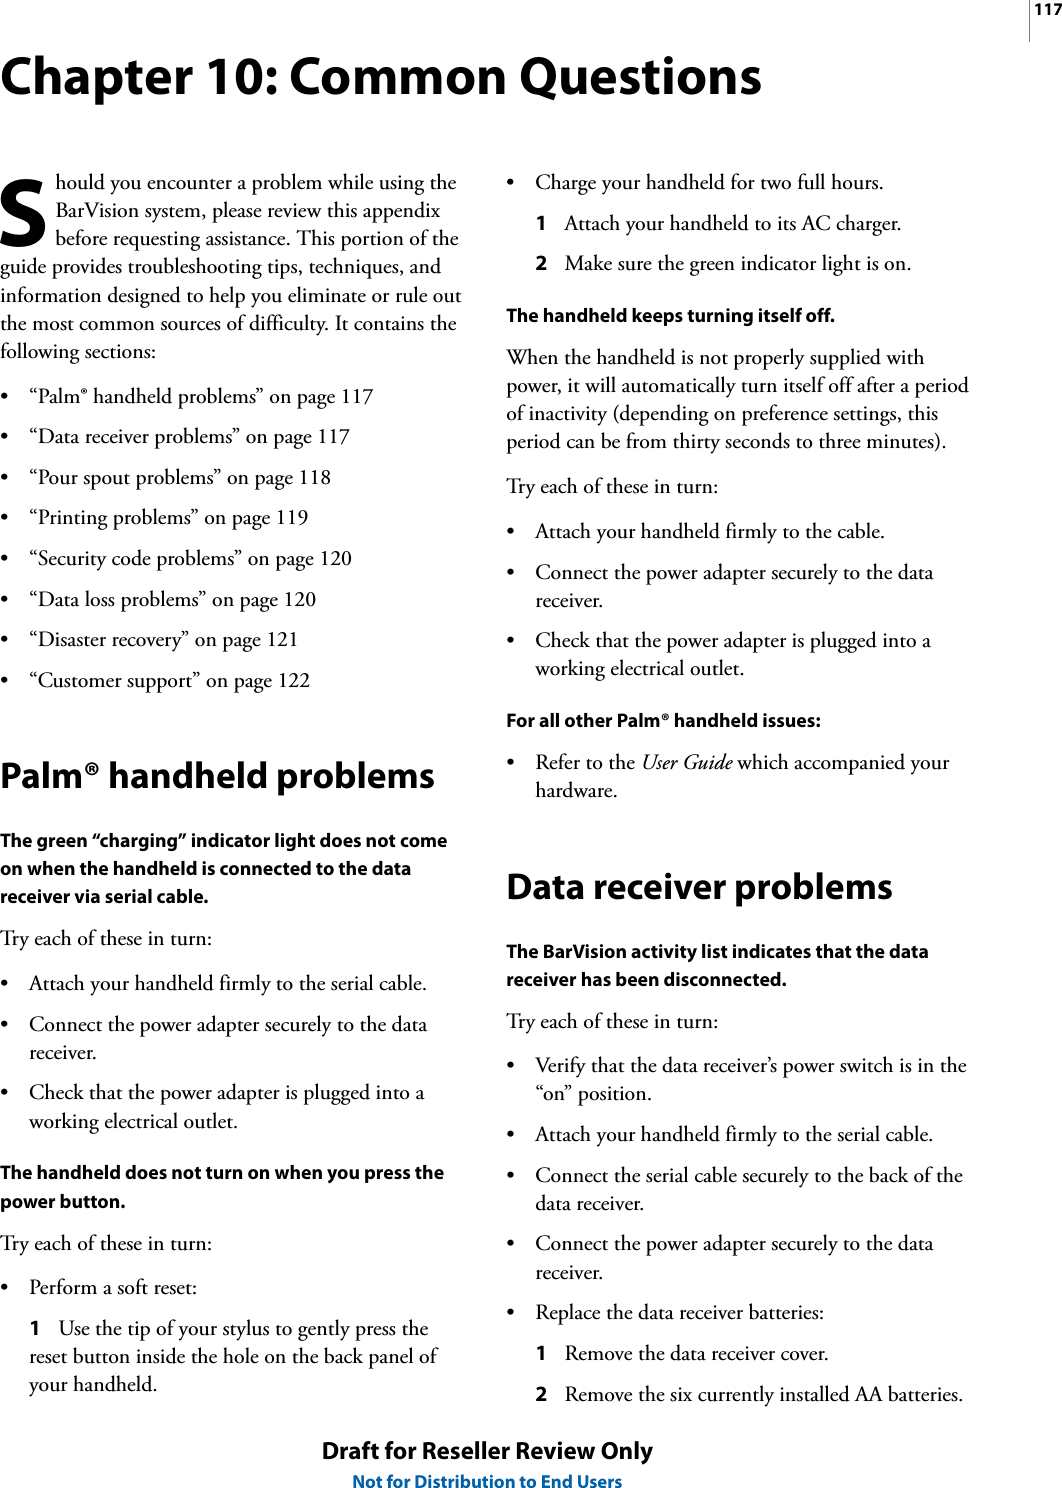 117Draft for Reseller Review OnlyNot for Distribution to End UsersChapter 10: Common Questionshould you encounter a problem while using the BarVision system, please review this appendix before requesting assistance. This portion of the guide provides troubleshooting tips, techniques, and information designed to help you eliminate or rule out the most common sources of difficulty. It contains the following sections:• “Palm® handheld problems” on page 117• “Data receiver problems” on page 117• “Pour spout problems” on page 118• “Printing problems” on page 119• “Security code problems” on page 120• “Data loss problems” on page 120• “Disaster recovery” on page 121• “Customer support” on page 122Palm® handheld problemsThe green “charging” indicator light does not come on when the handheld is connected to the data receiver via serial cable.Try each of these in turn:• Attach your handheld firmly to the serial cable.• Connect the power adapter securely to the data receiver.• Check that the power adapter is plugged into a working electrical outlet.The handheld does not turn on when you press the power button.Try each of these in turn:• Perform a soft reset:1Use the tip of your stylus to gently press the reset button inside the hole on the back panel of your handheld.• Charge your handheld for two full hours.1Attach your handheld to its AC charger.2Make sure the green indicator light is on.The handheld keeps turning itself off.When the handheld is not properly supplied with power, it will automatically turn itself off after a period of inactivity (depending on preference settings, this period can be from thirty seconds to three minutes).Try each of these in turn:• Attach your handheld firmly to the cable.• Connect the power adapter securely to the data receiver.• Check that the power adapter is plugged into a working electrical outlet.For all other Palm® handheld issues:• Refer to the User Guide which accompanied your hardware.Data receiver problemsThe BarVision activity list indicates that the data receiver has been disconnected.Try each of these in turn:• Verify that the data receiver’s power switch is in the “on” position.• Attach your handheld firmly to the serial cable.• Connect the serial cable securely to the back of the data receiver.• Connect the power adapter securely to the data receiver.• Replace the data receiver batteries:1Remove the data receiver cover.2Remove the six currently installed AA batteries.S